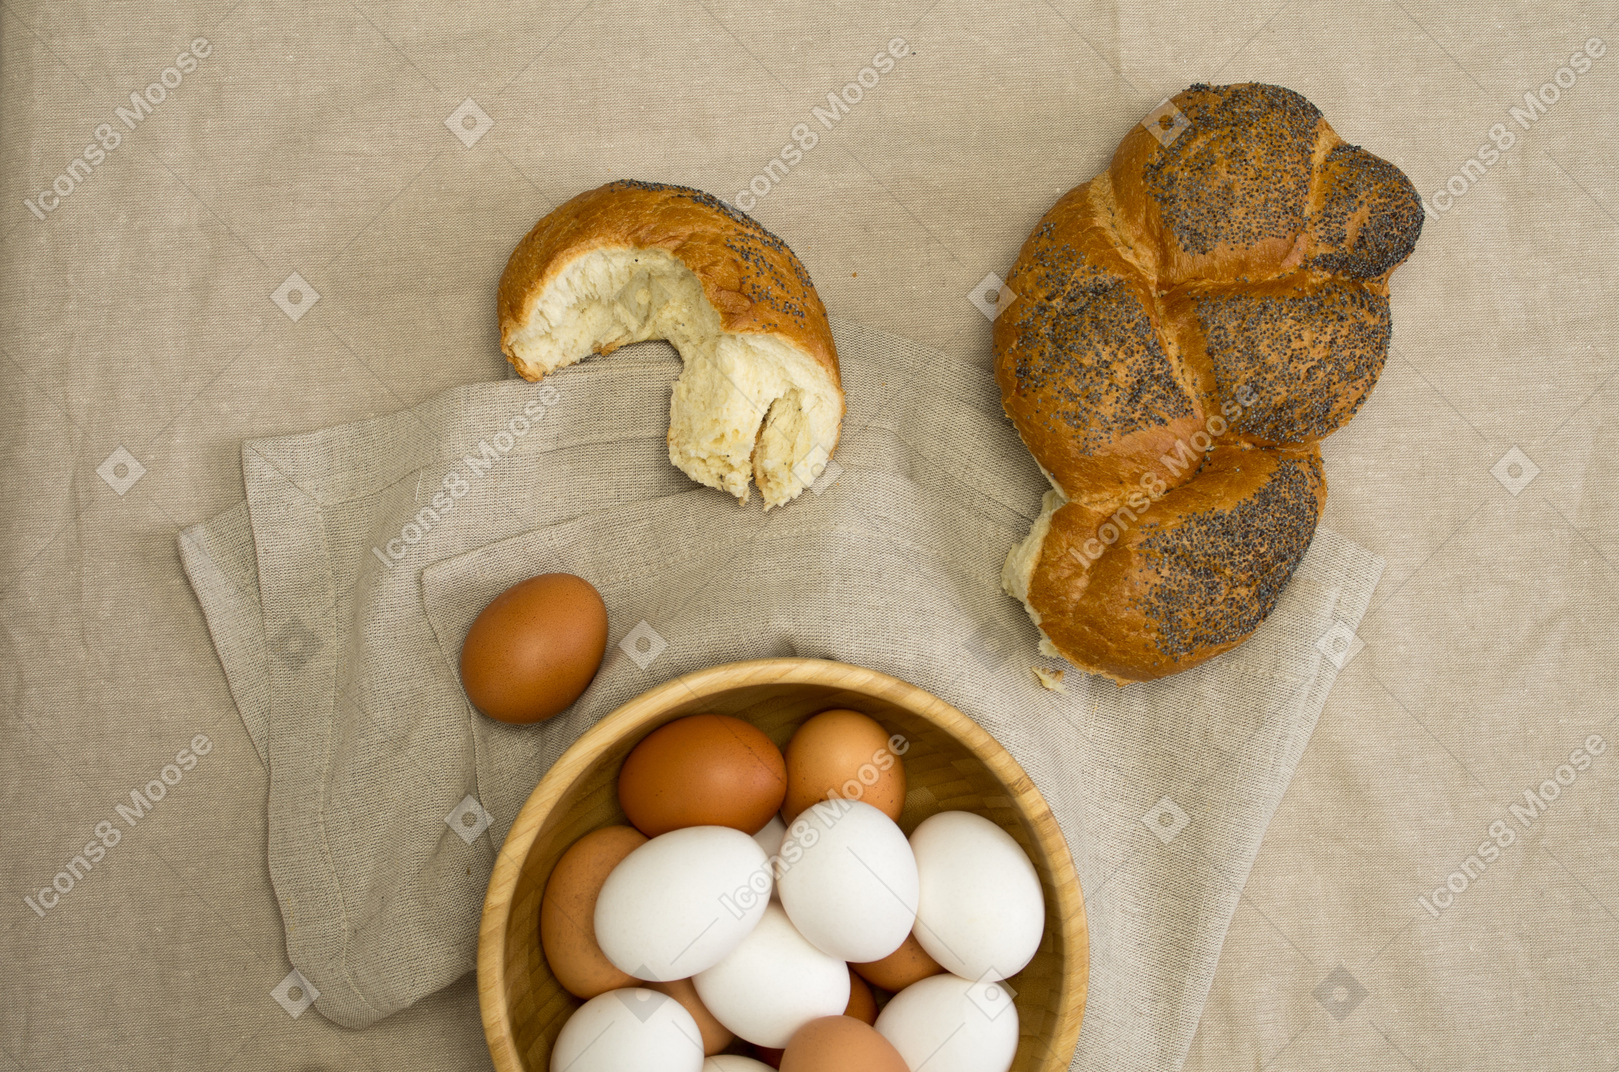 Chicken eggs and a loaf of bread on a gray tablecloth